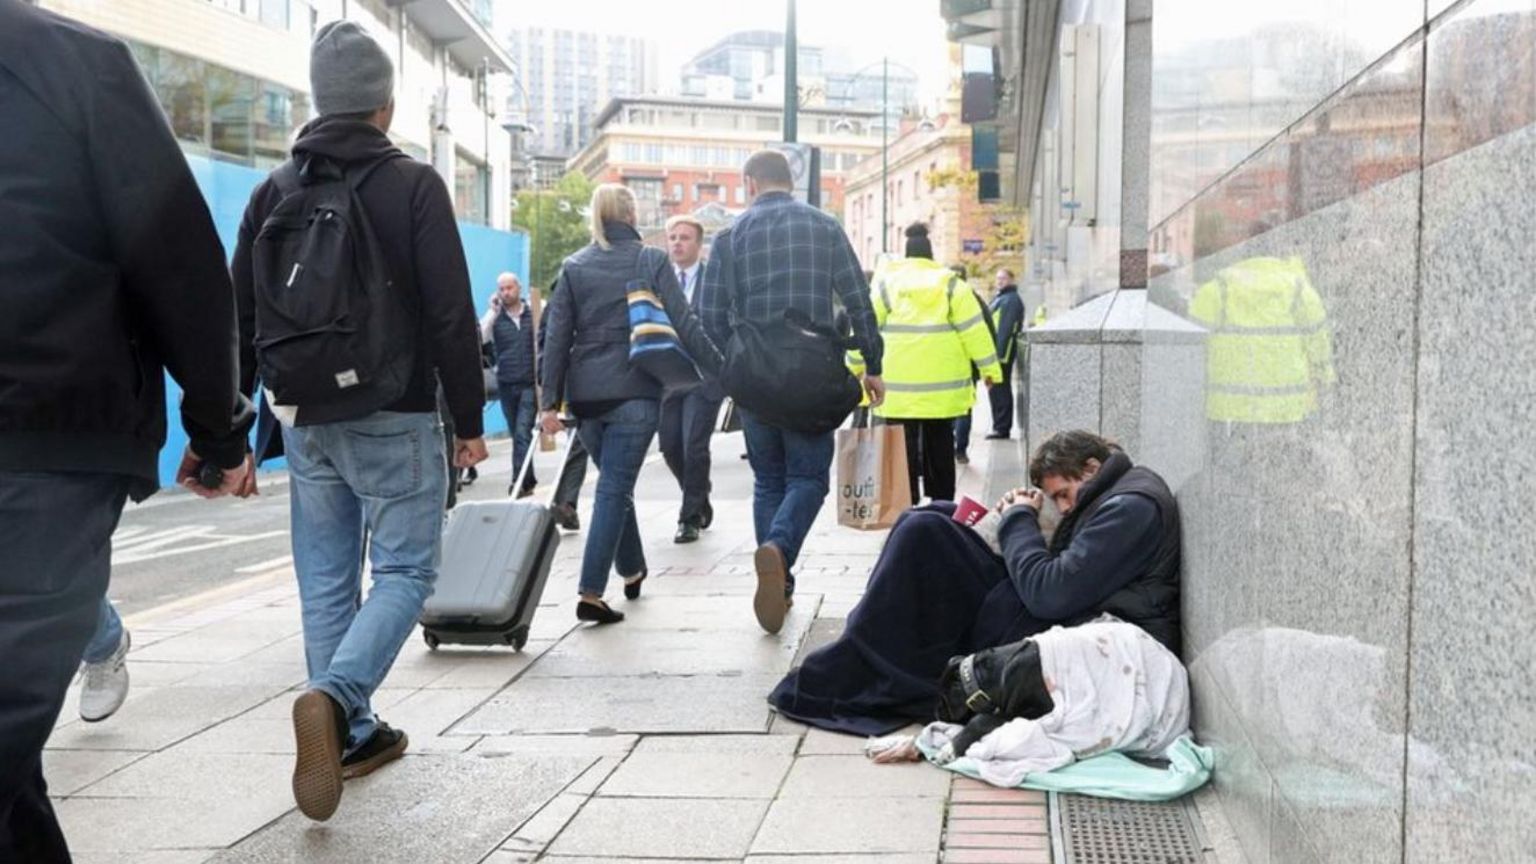 A person rough sleeping on the street